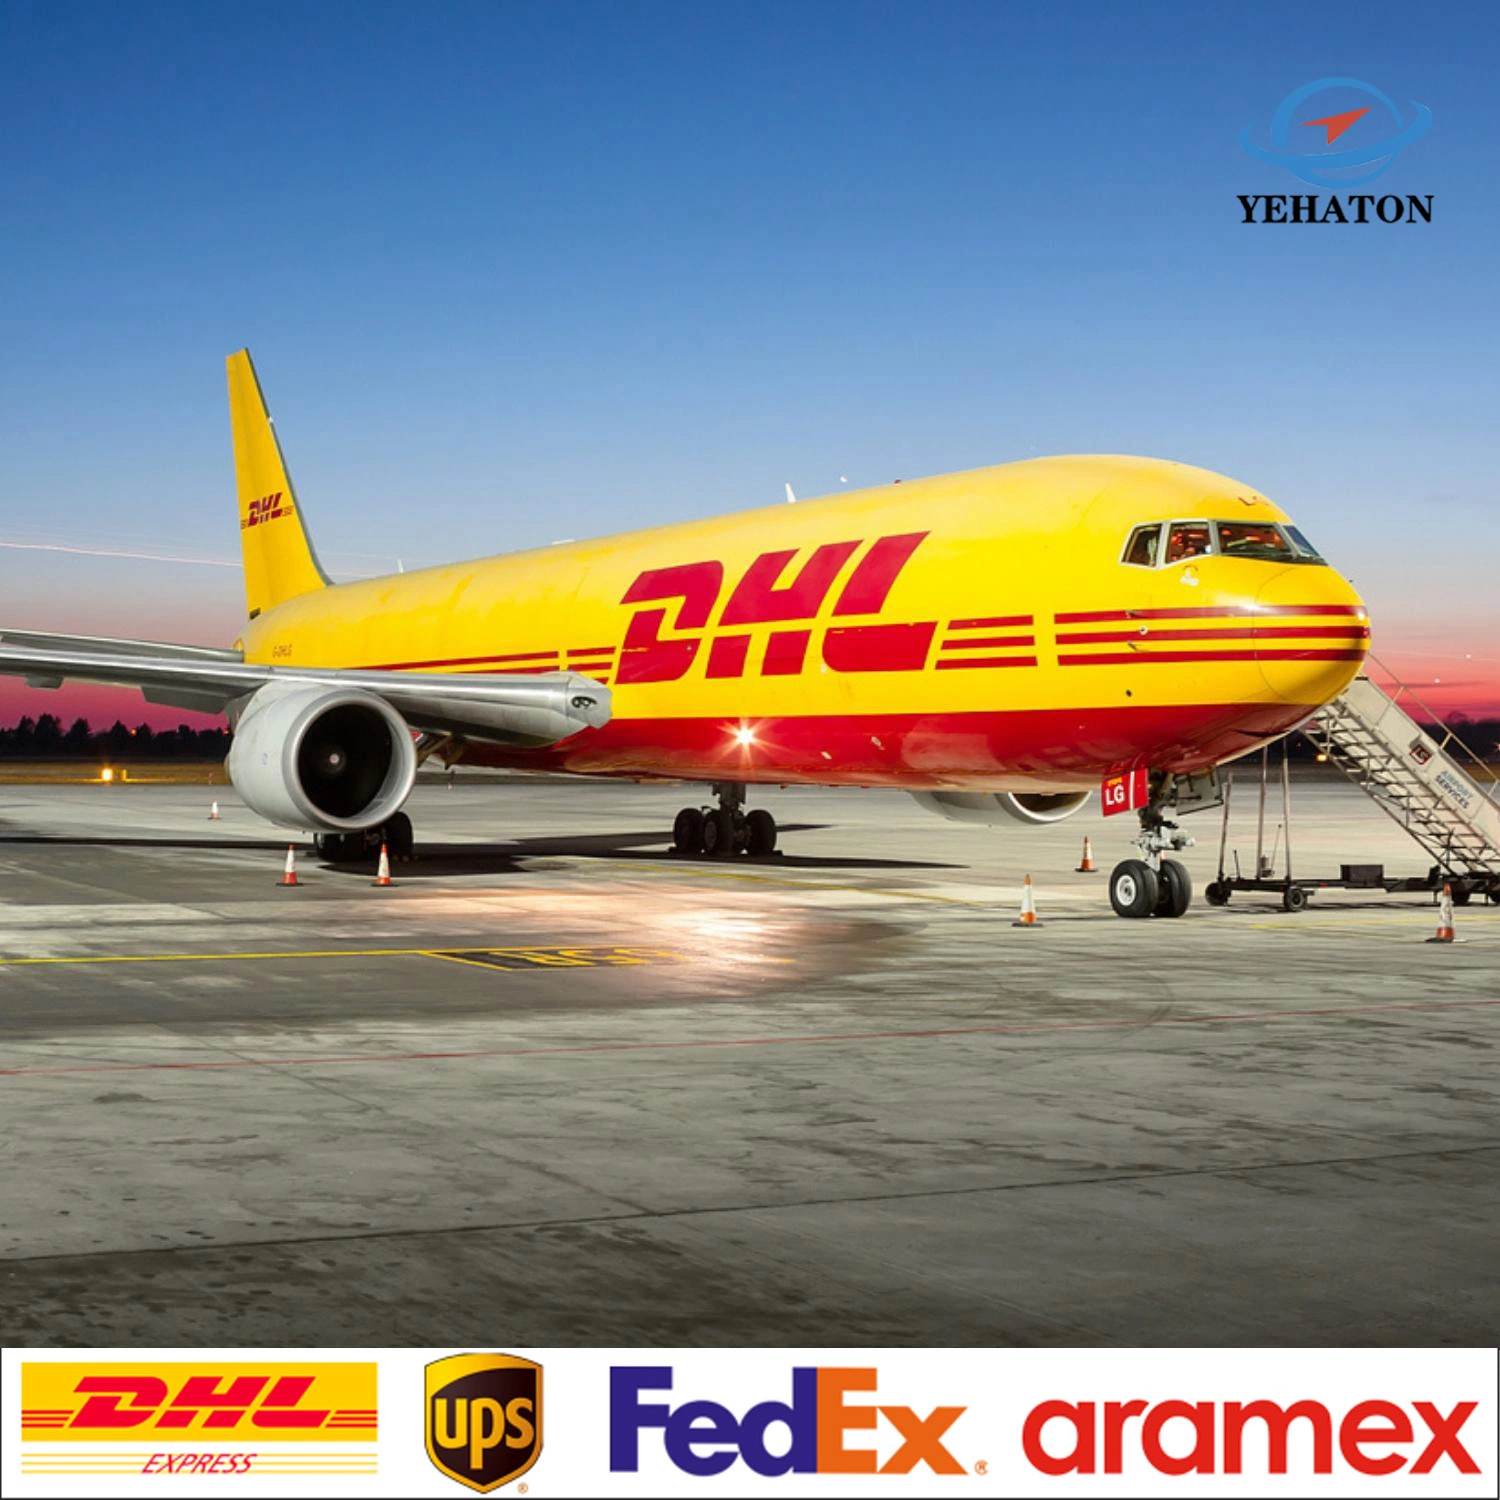 Reliable Alibaba Experss Deliveryto Mexico, Amazon Wholesale Import From China Air Cargo Ship Price Drop Shipping Agent Logistic Service Sea Freight Forwarder